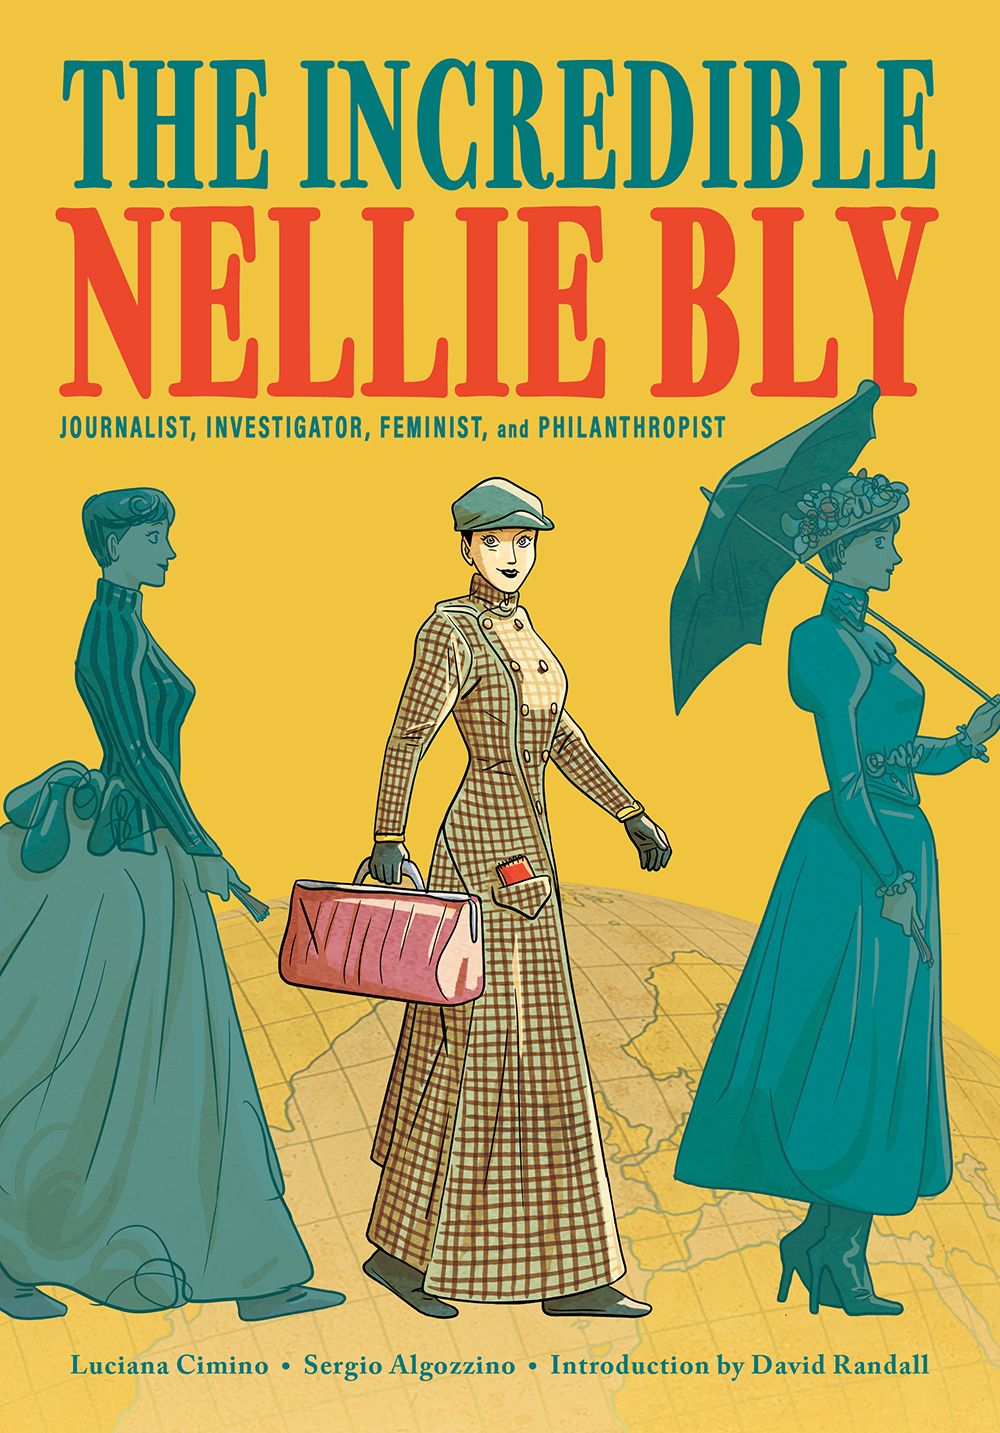 the incredibly nellie bly cover